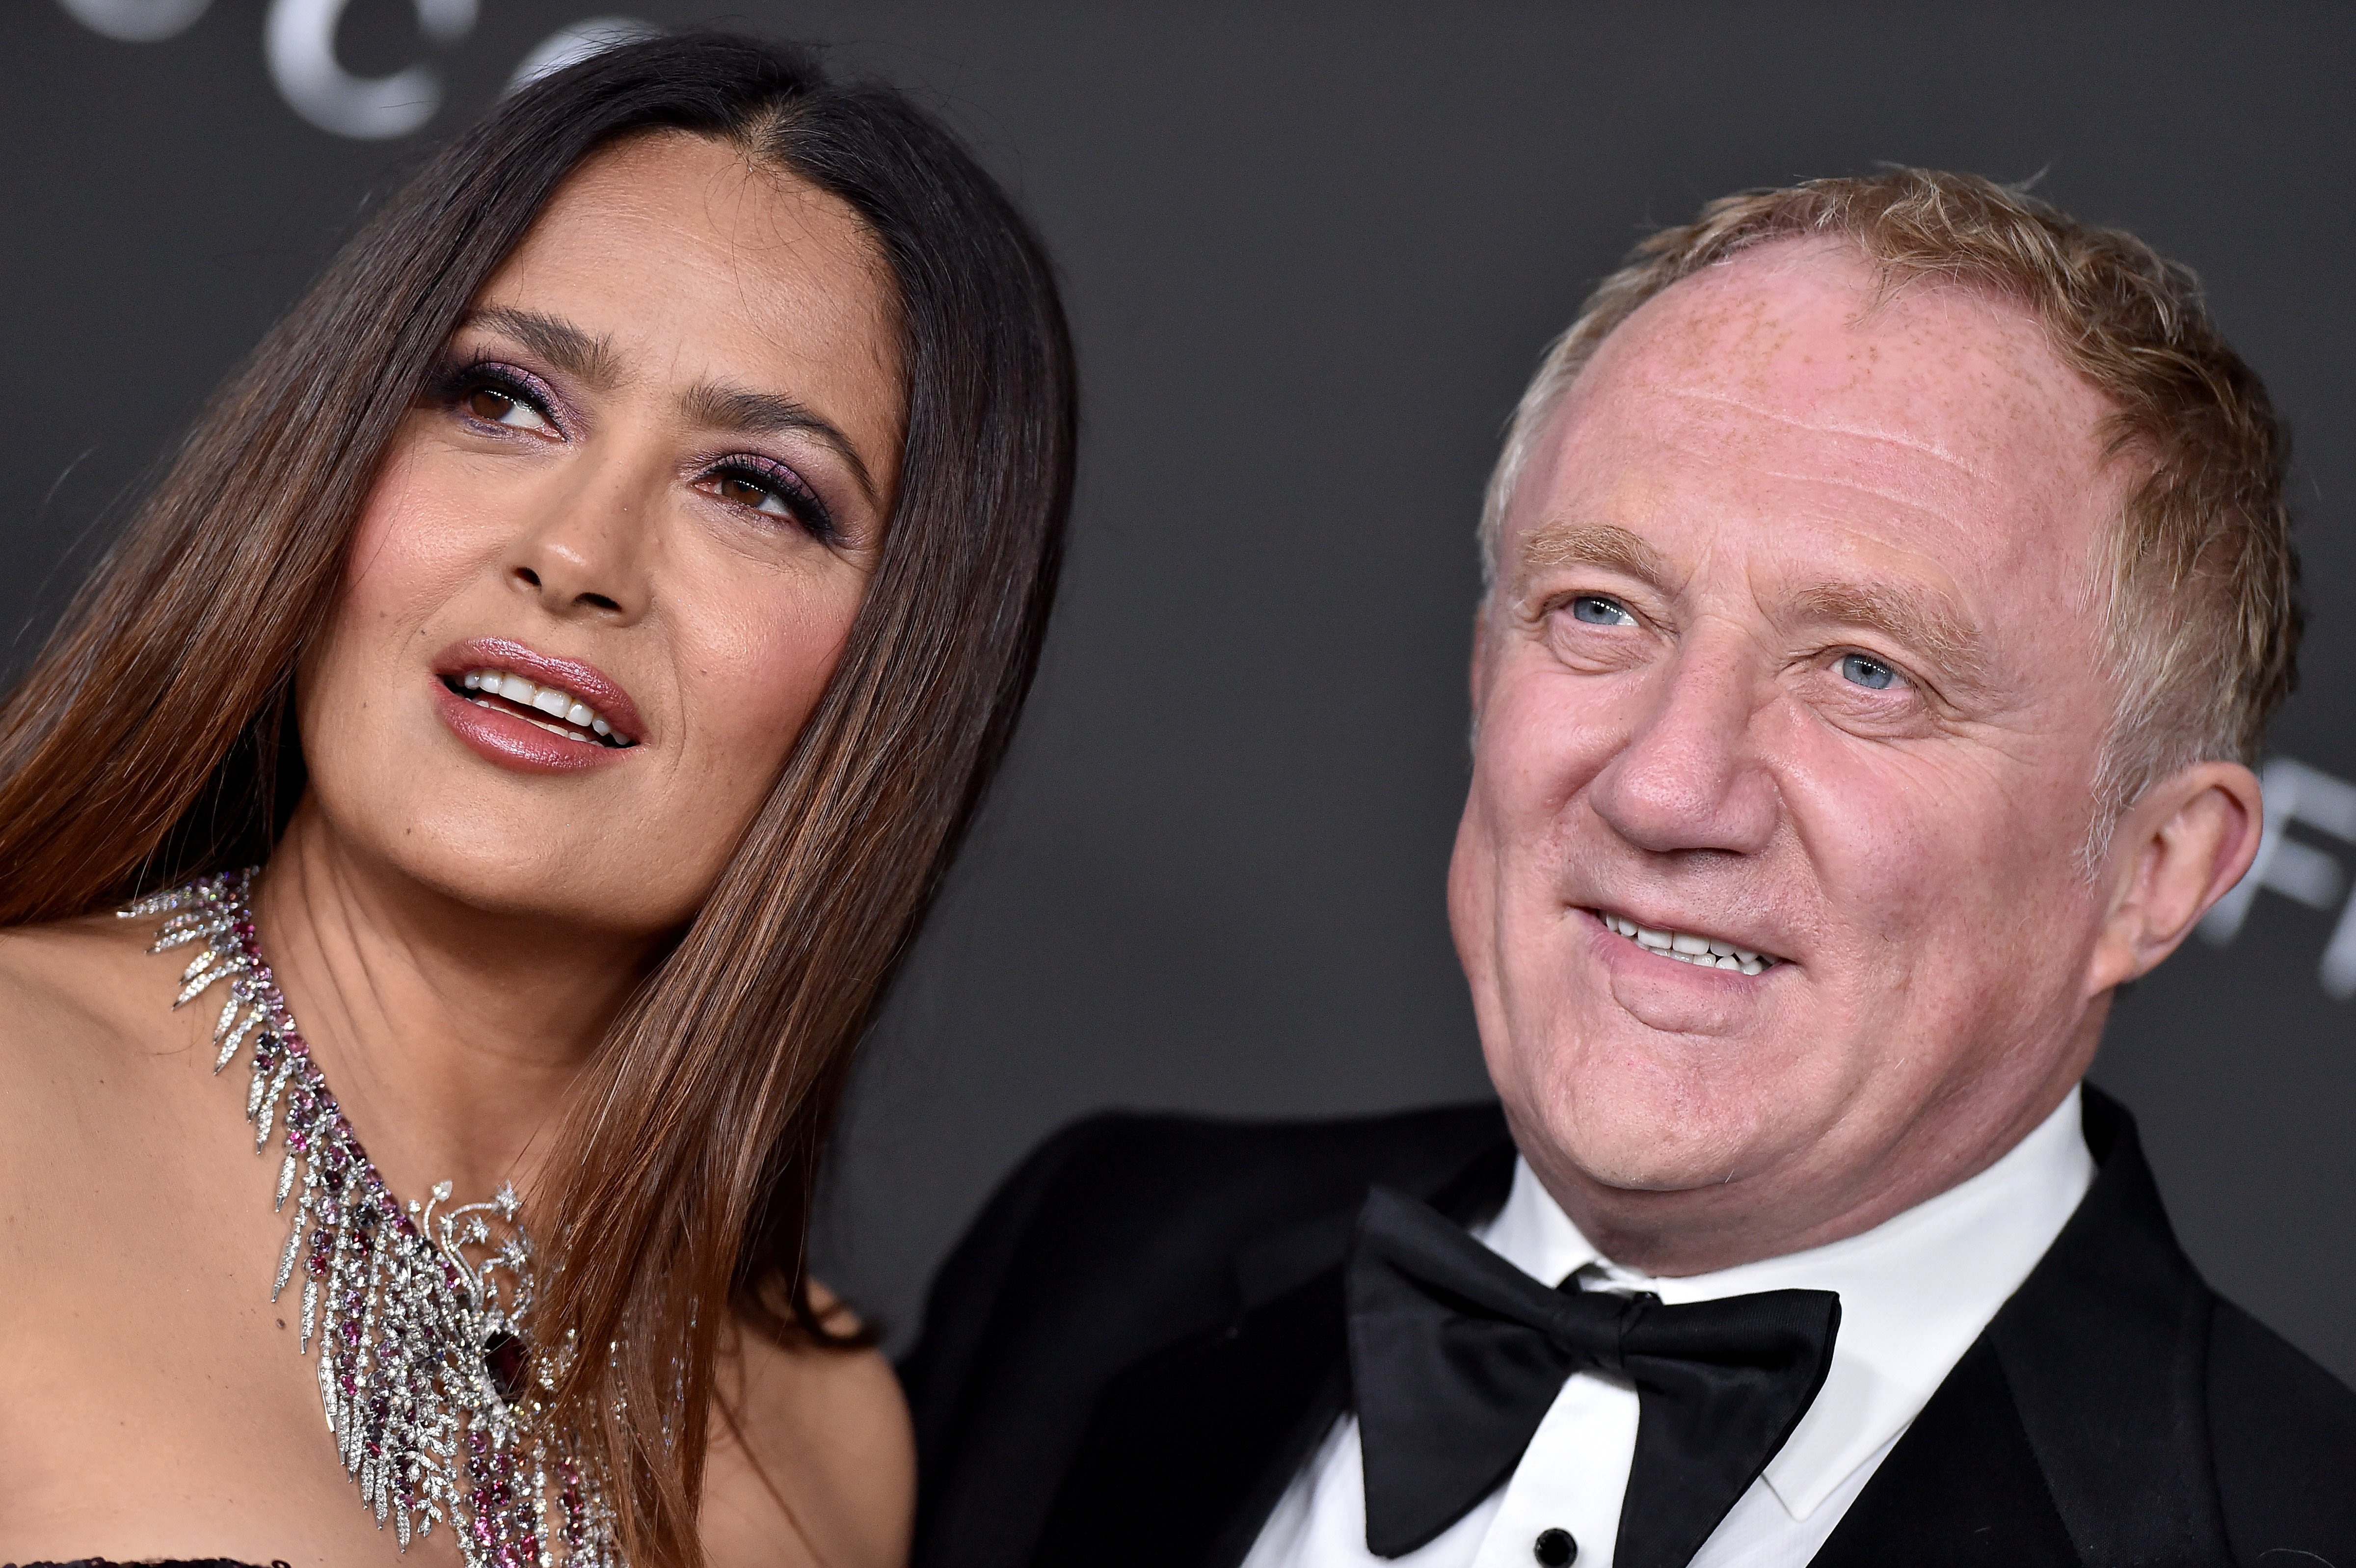 Salma Hayek Pinault and François-Henri Pinault attend the 10th Annual LACMA Art+Film Gala presented by Gucci at Los Angeles County Museum of Art on November 06, 2021. | Photo: Getty Images